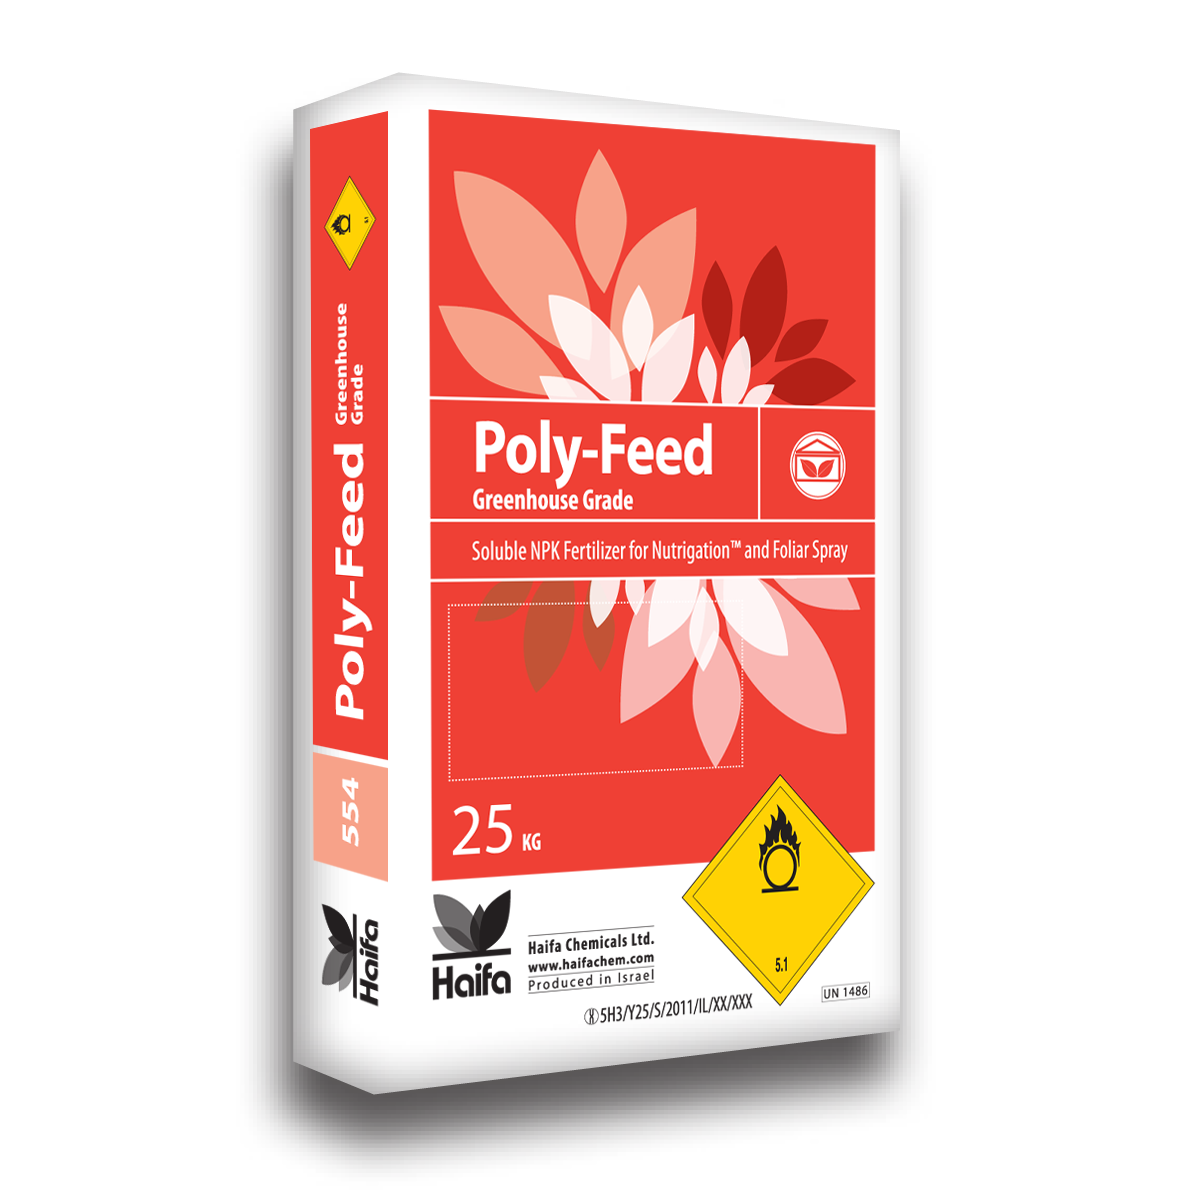 Poly-Feed GG solution